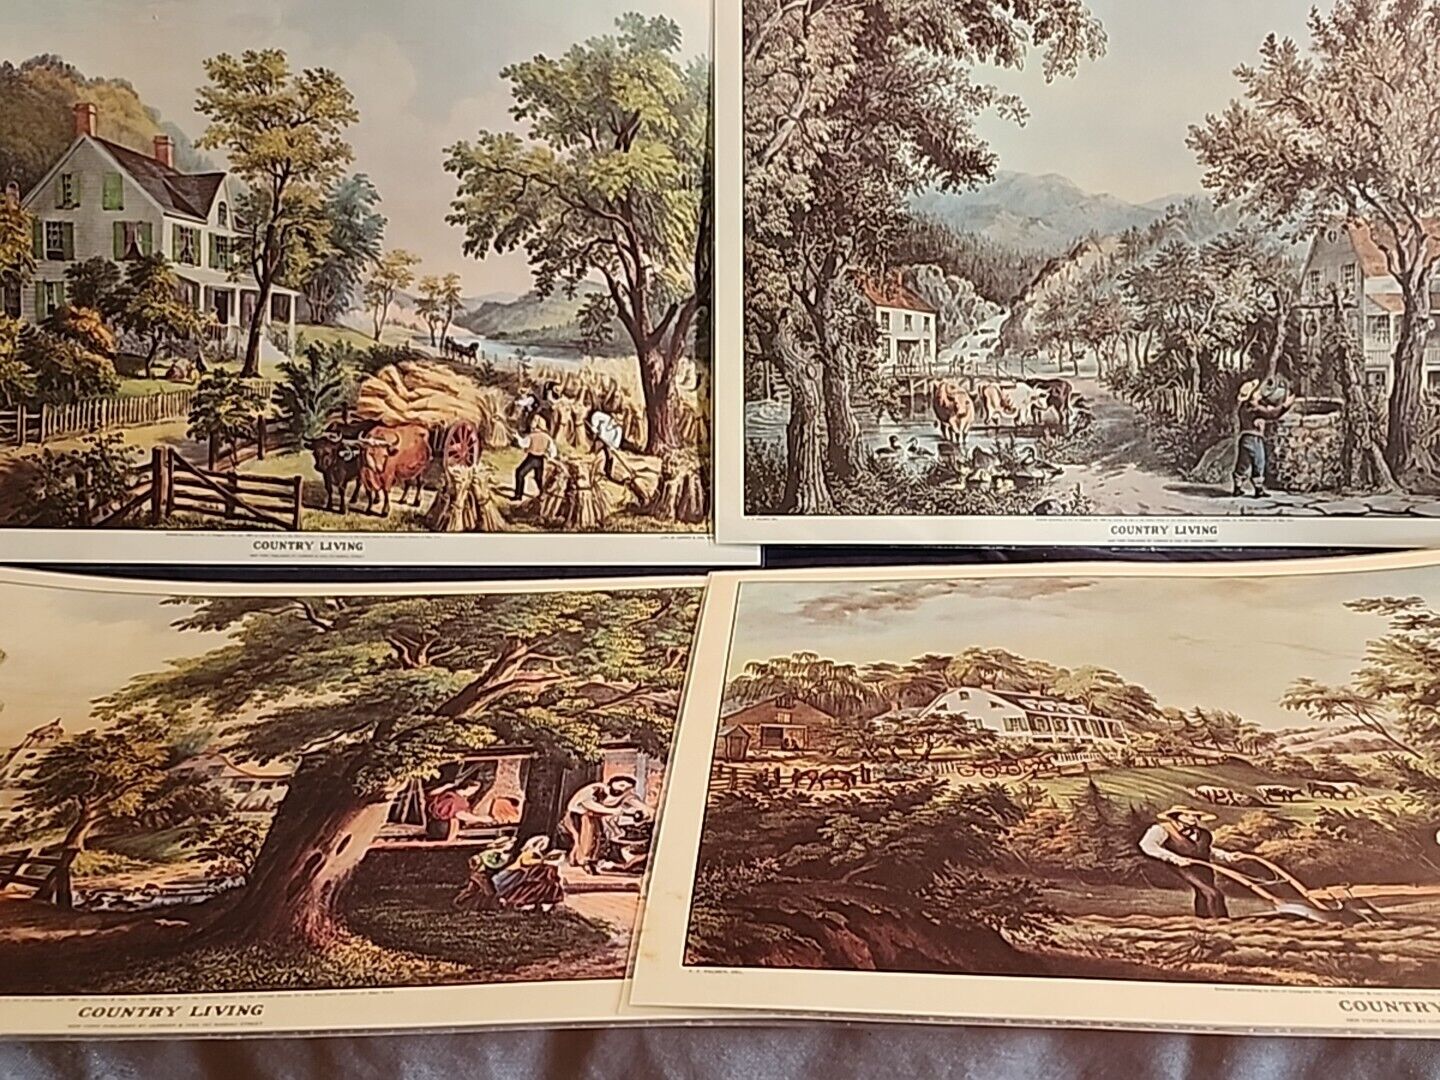 4 Vintage Currier & Ives Country Living Laminated Lithograph Print Placemats 